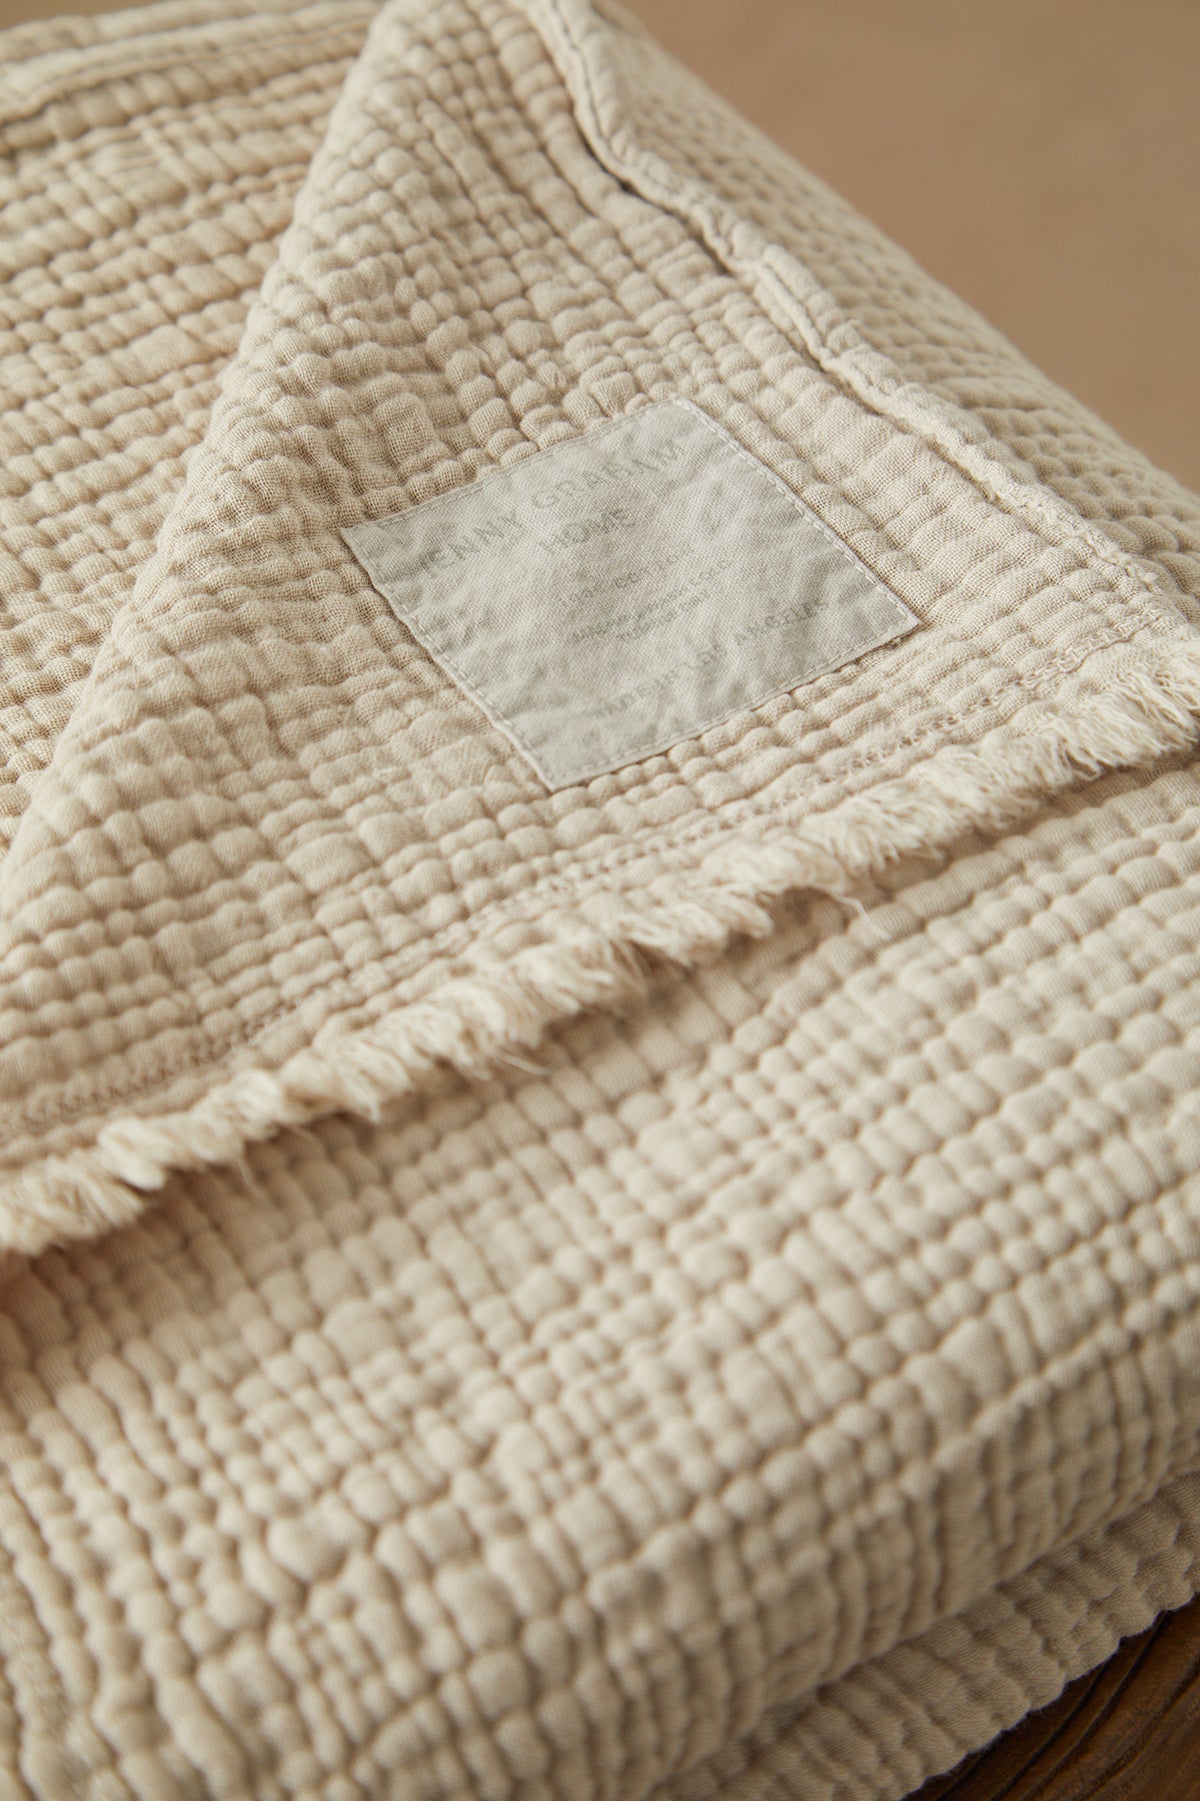   A Jenny Graham Home beige Cotton Gauze Throw folded on top of a wooden table. 